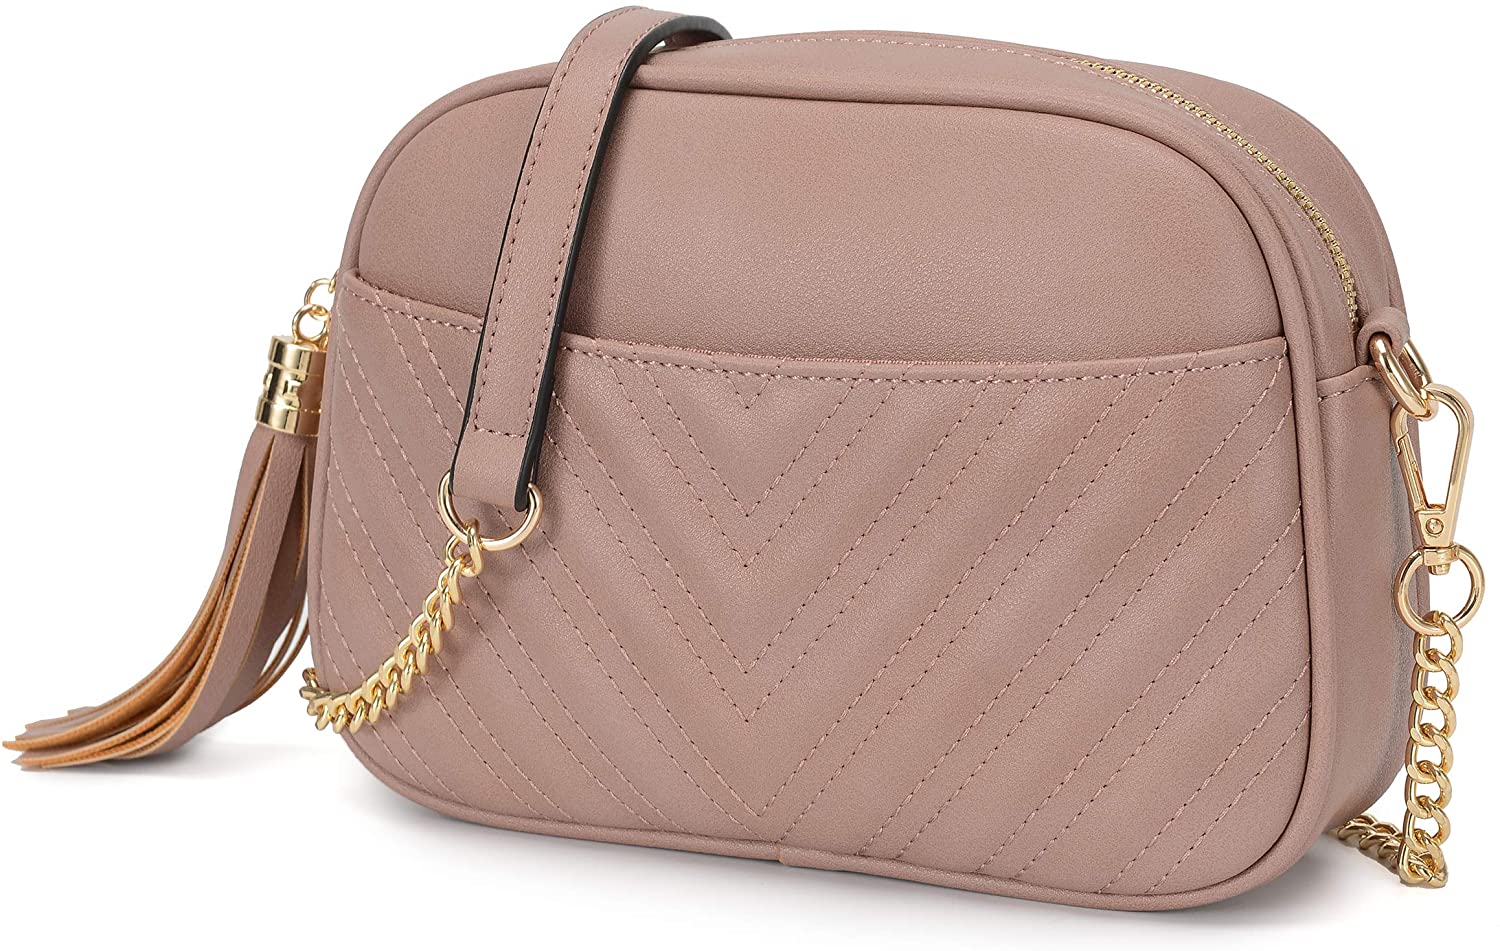 Lola Mae Crossbody Will Make You Want to Return Your Designer Bags